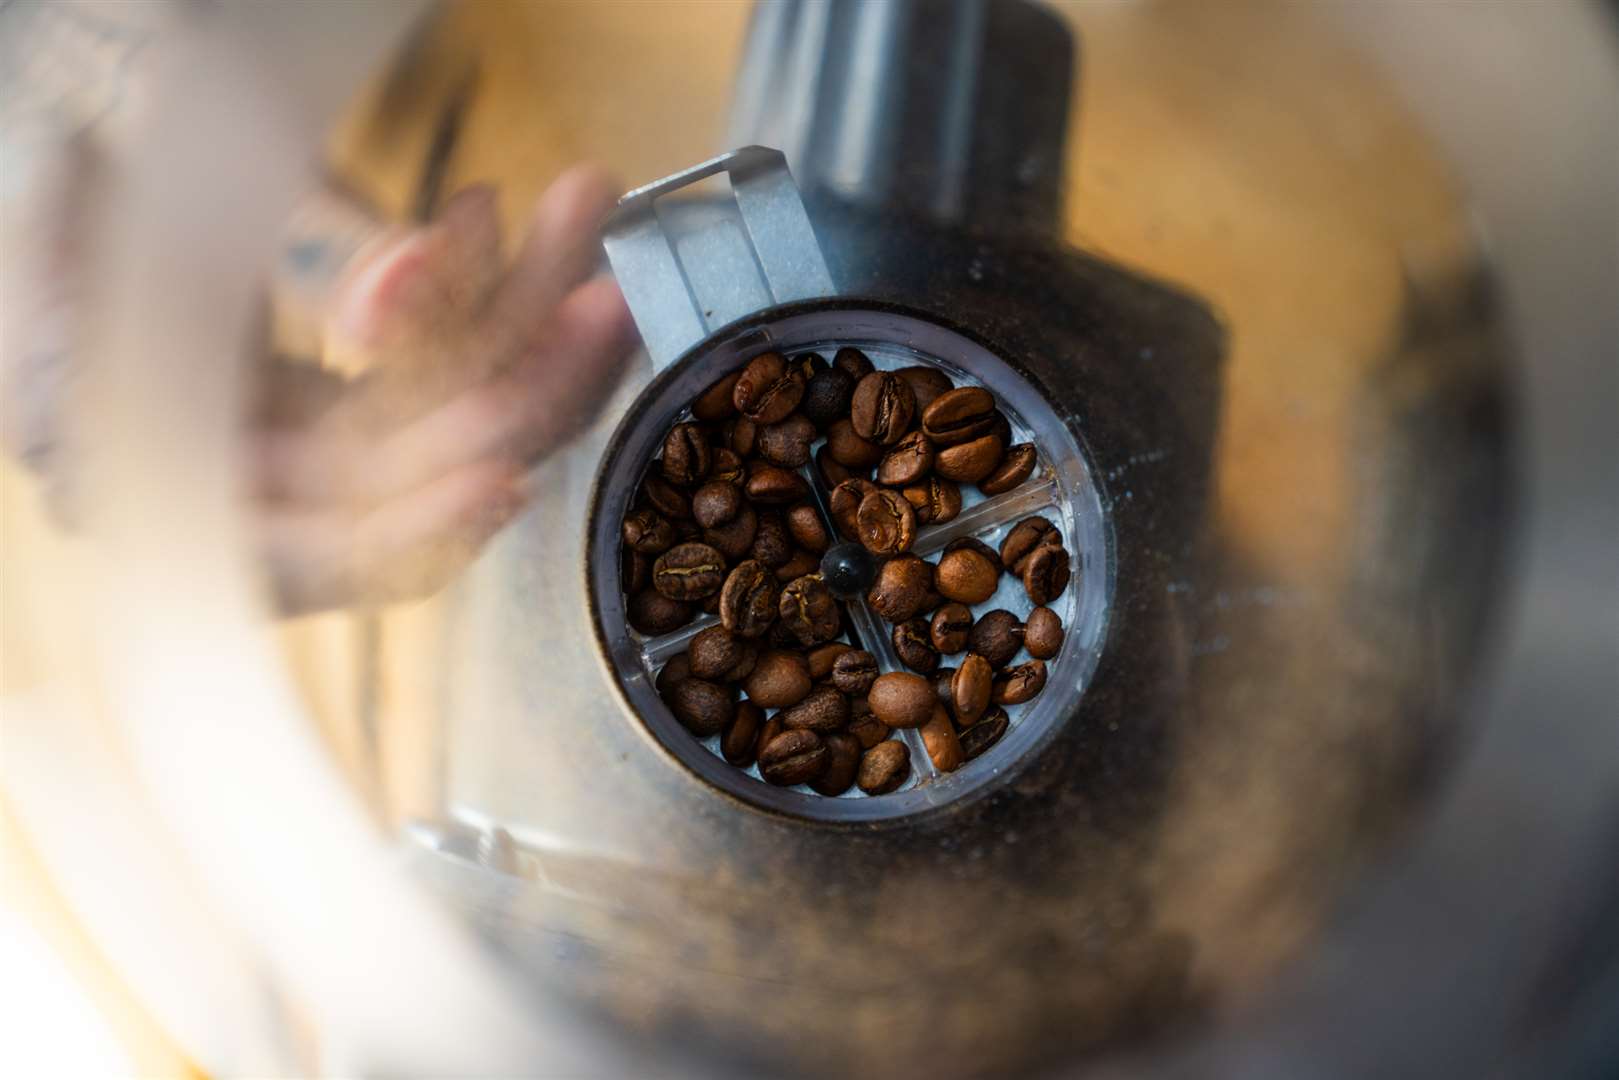 The friction of coffee beans during grinding generates electricity that causes coffee particles to clump together and stick to the grinder (University of Oregon)